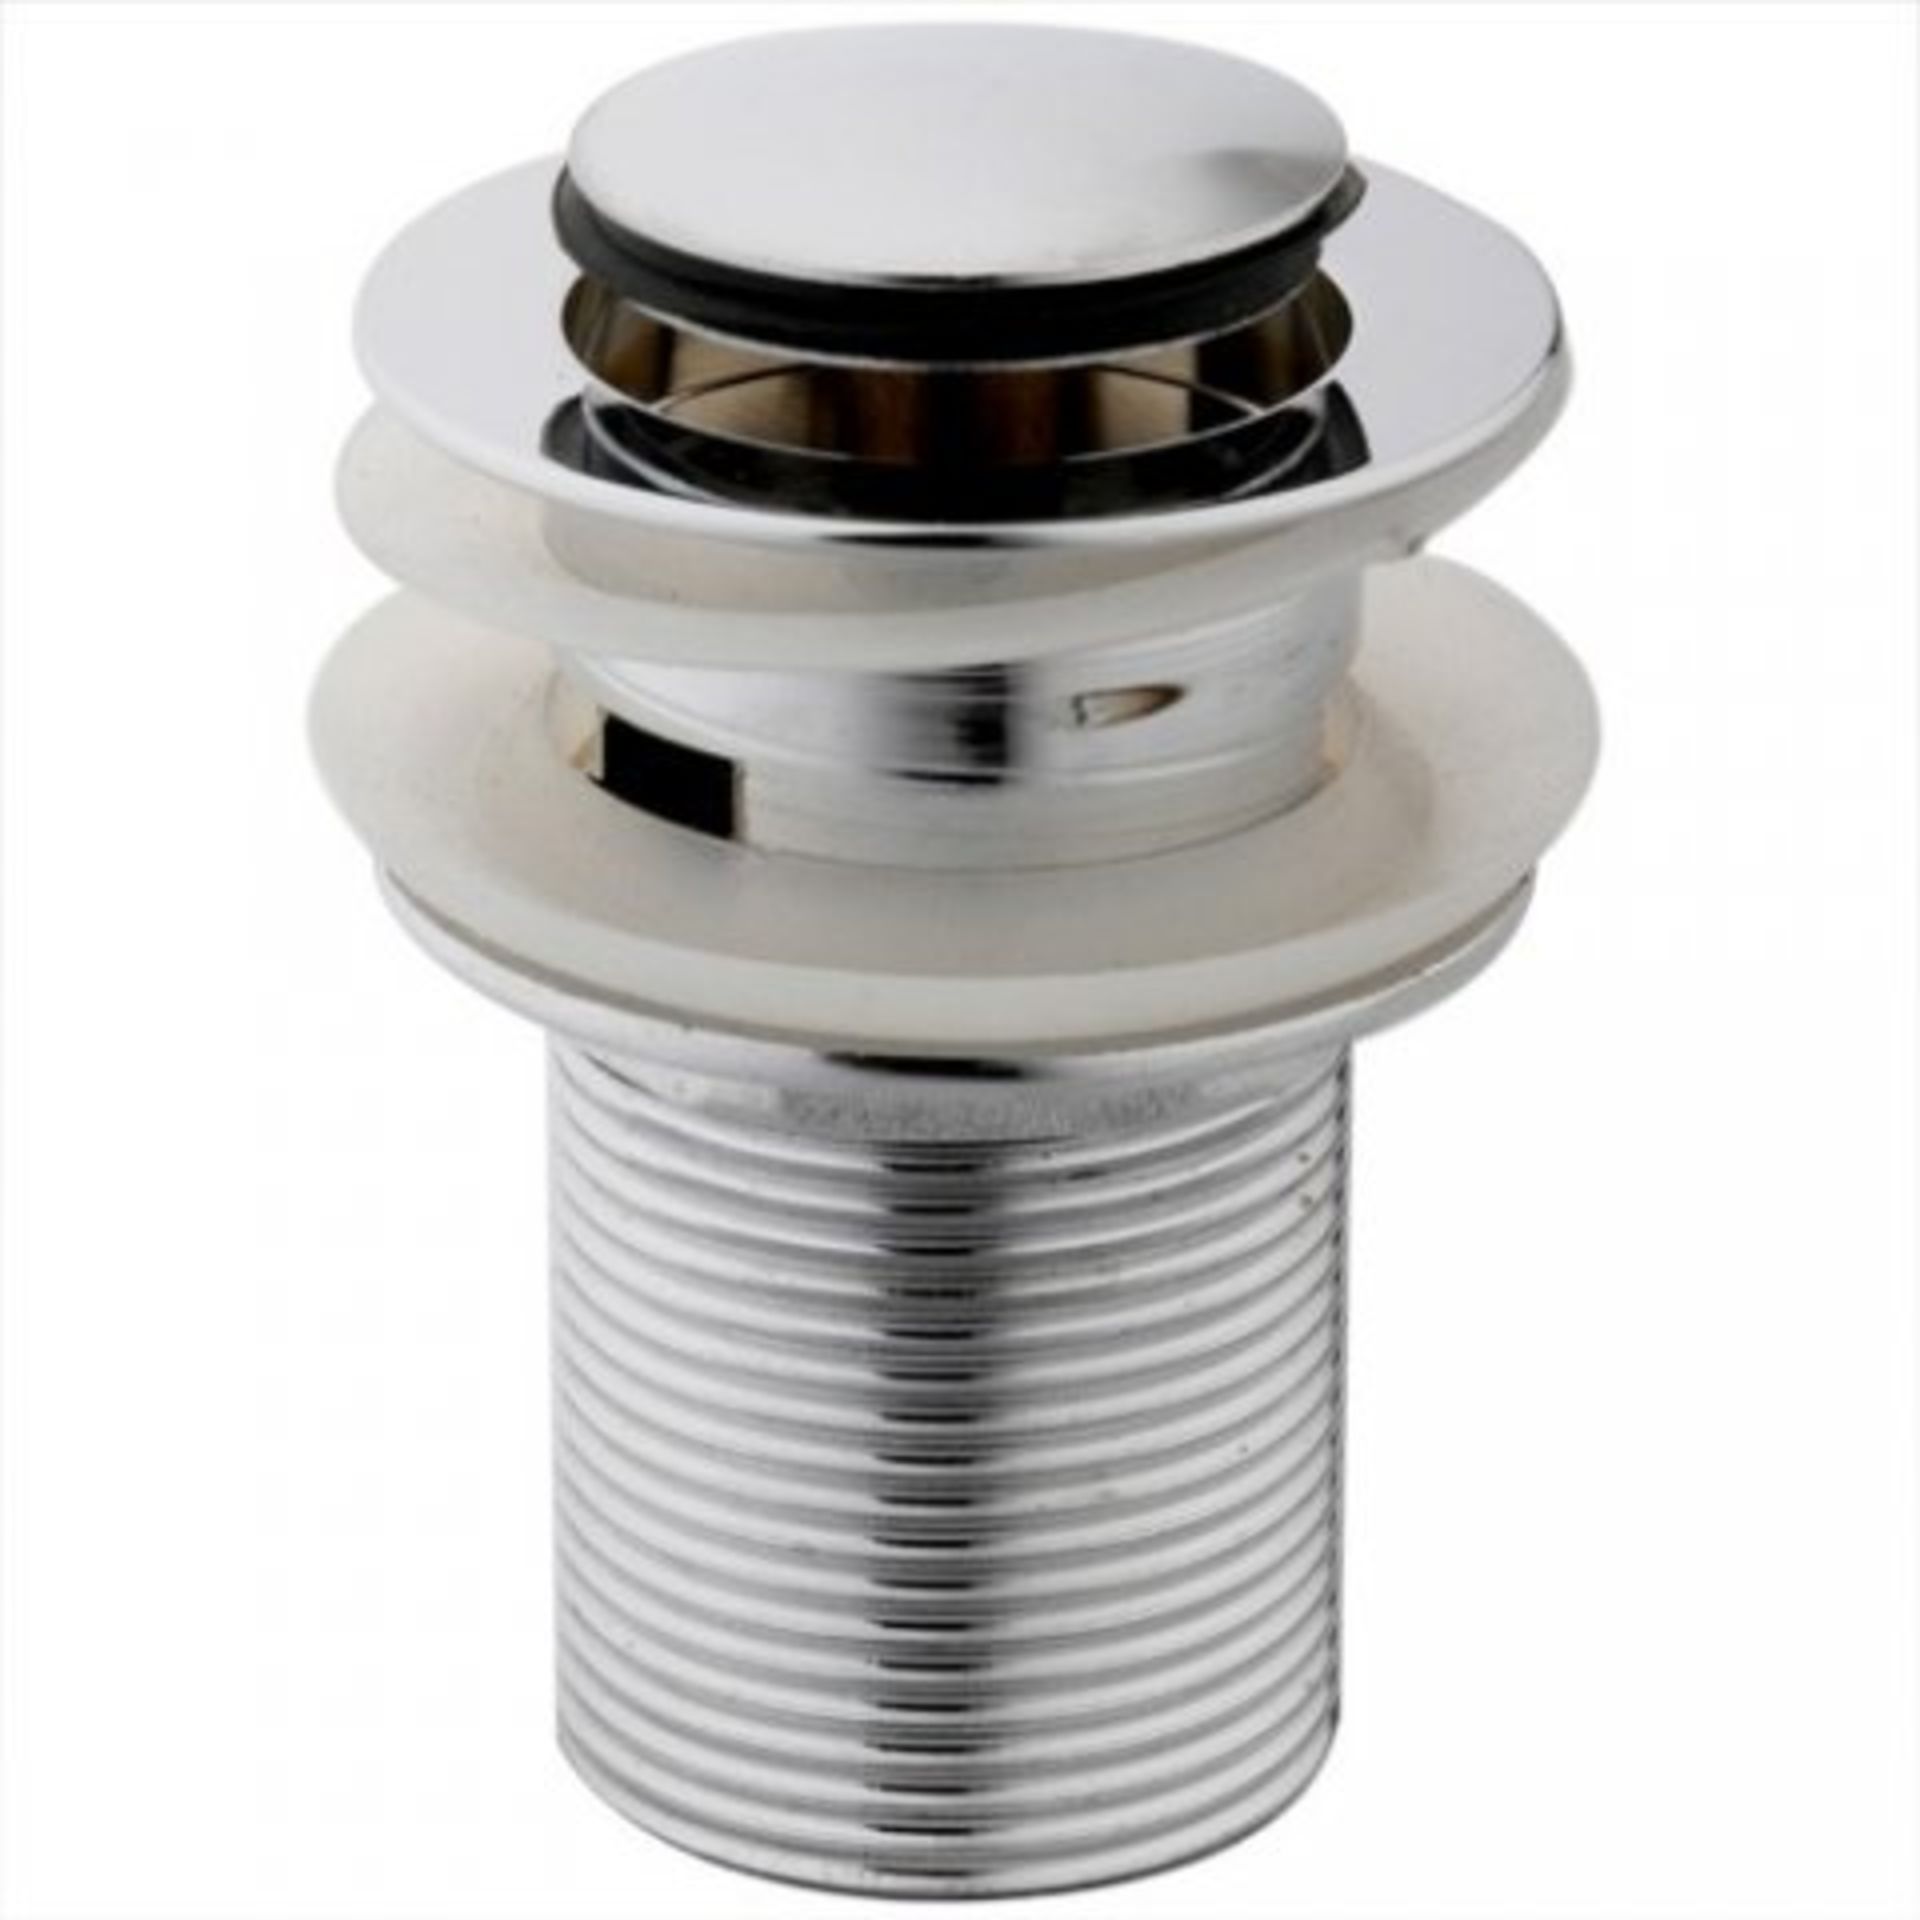 (O319) Basin Waste - Slotted Push Button Pop-Up This slotted push button pop-up basin waste is ideal